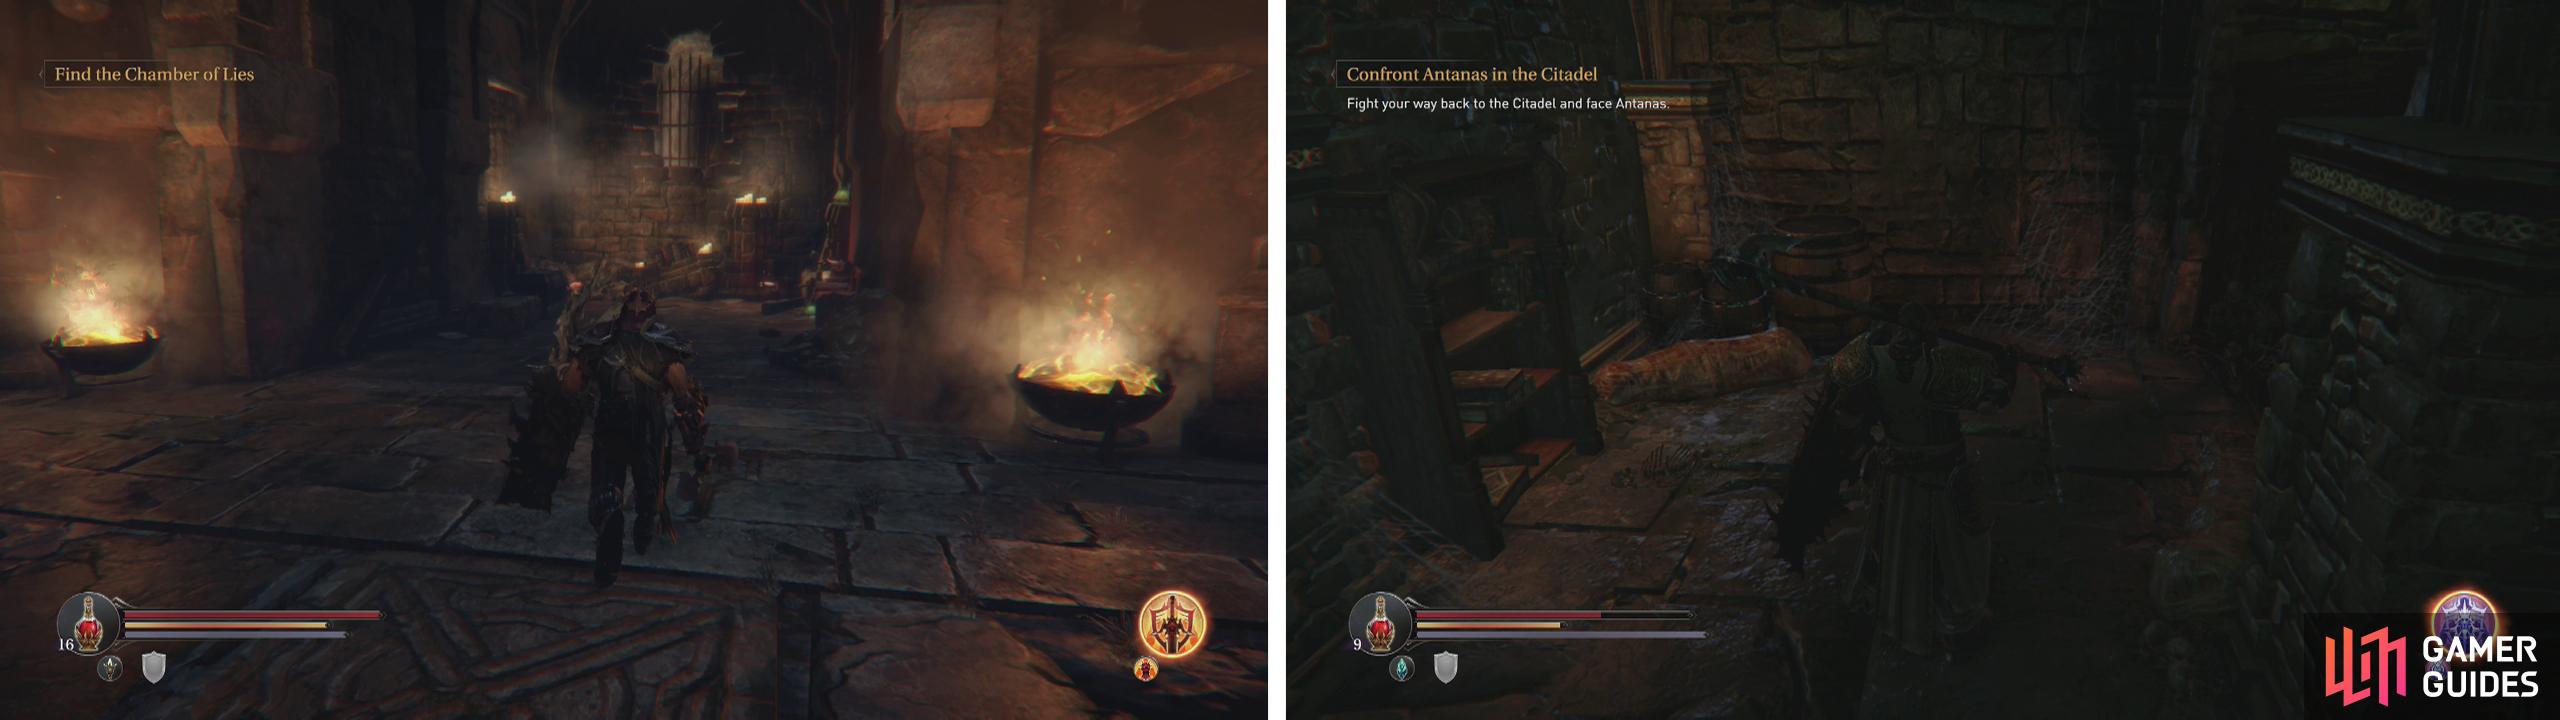 After defeating the Beast, return to the Champions arena to find a chest and several Audio Notes (left). There is a hidden wall in the Cellar area containing an Empty Bottle (right).